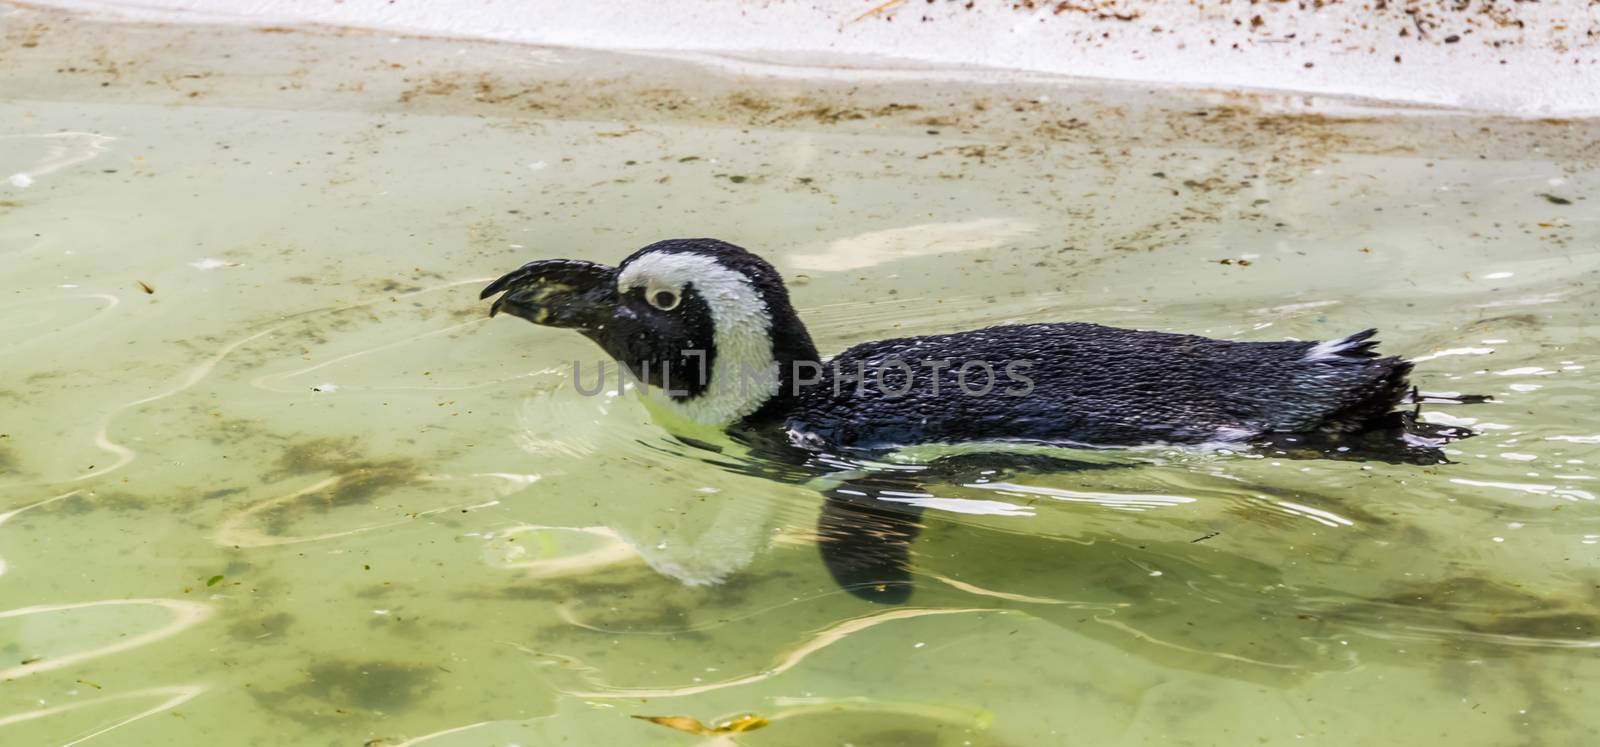 african penguin swimming in the water, flightless bird from Africa, Endangered animal specie